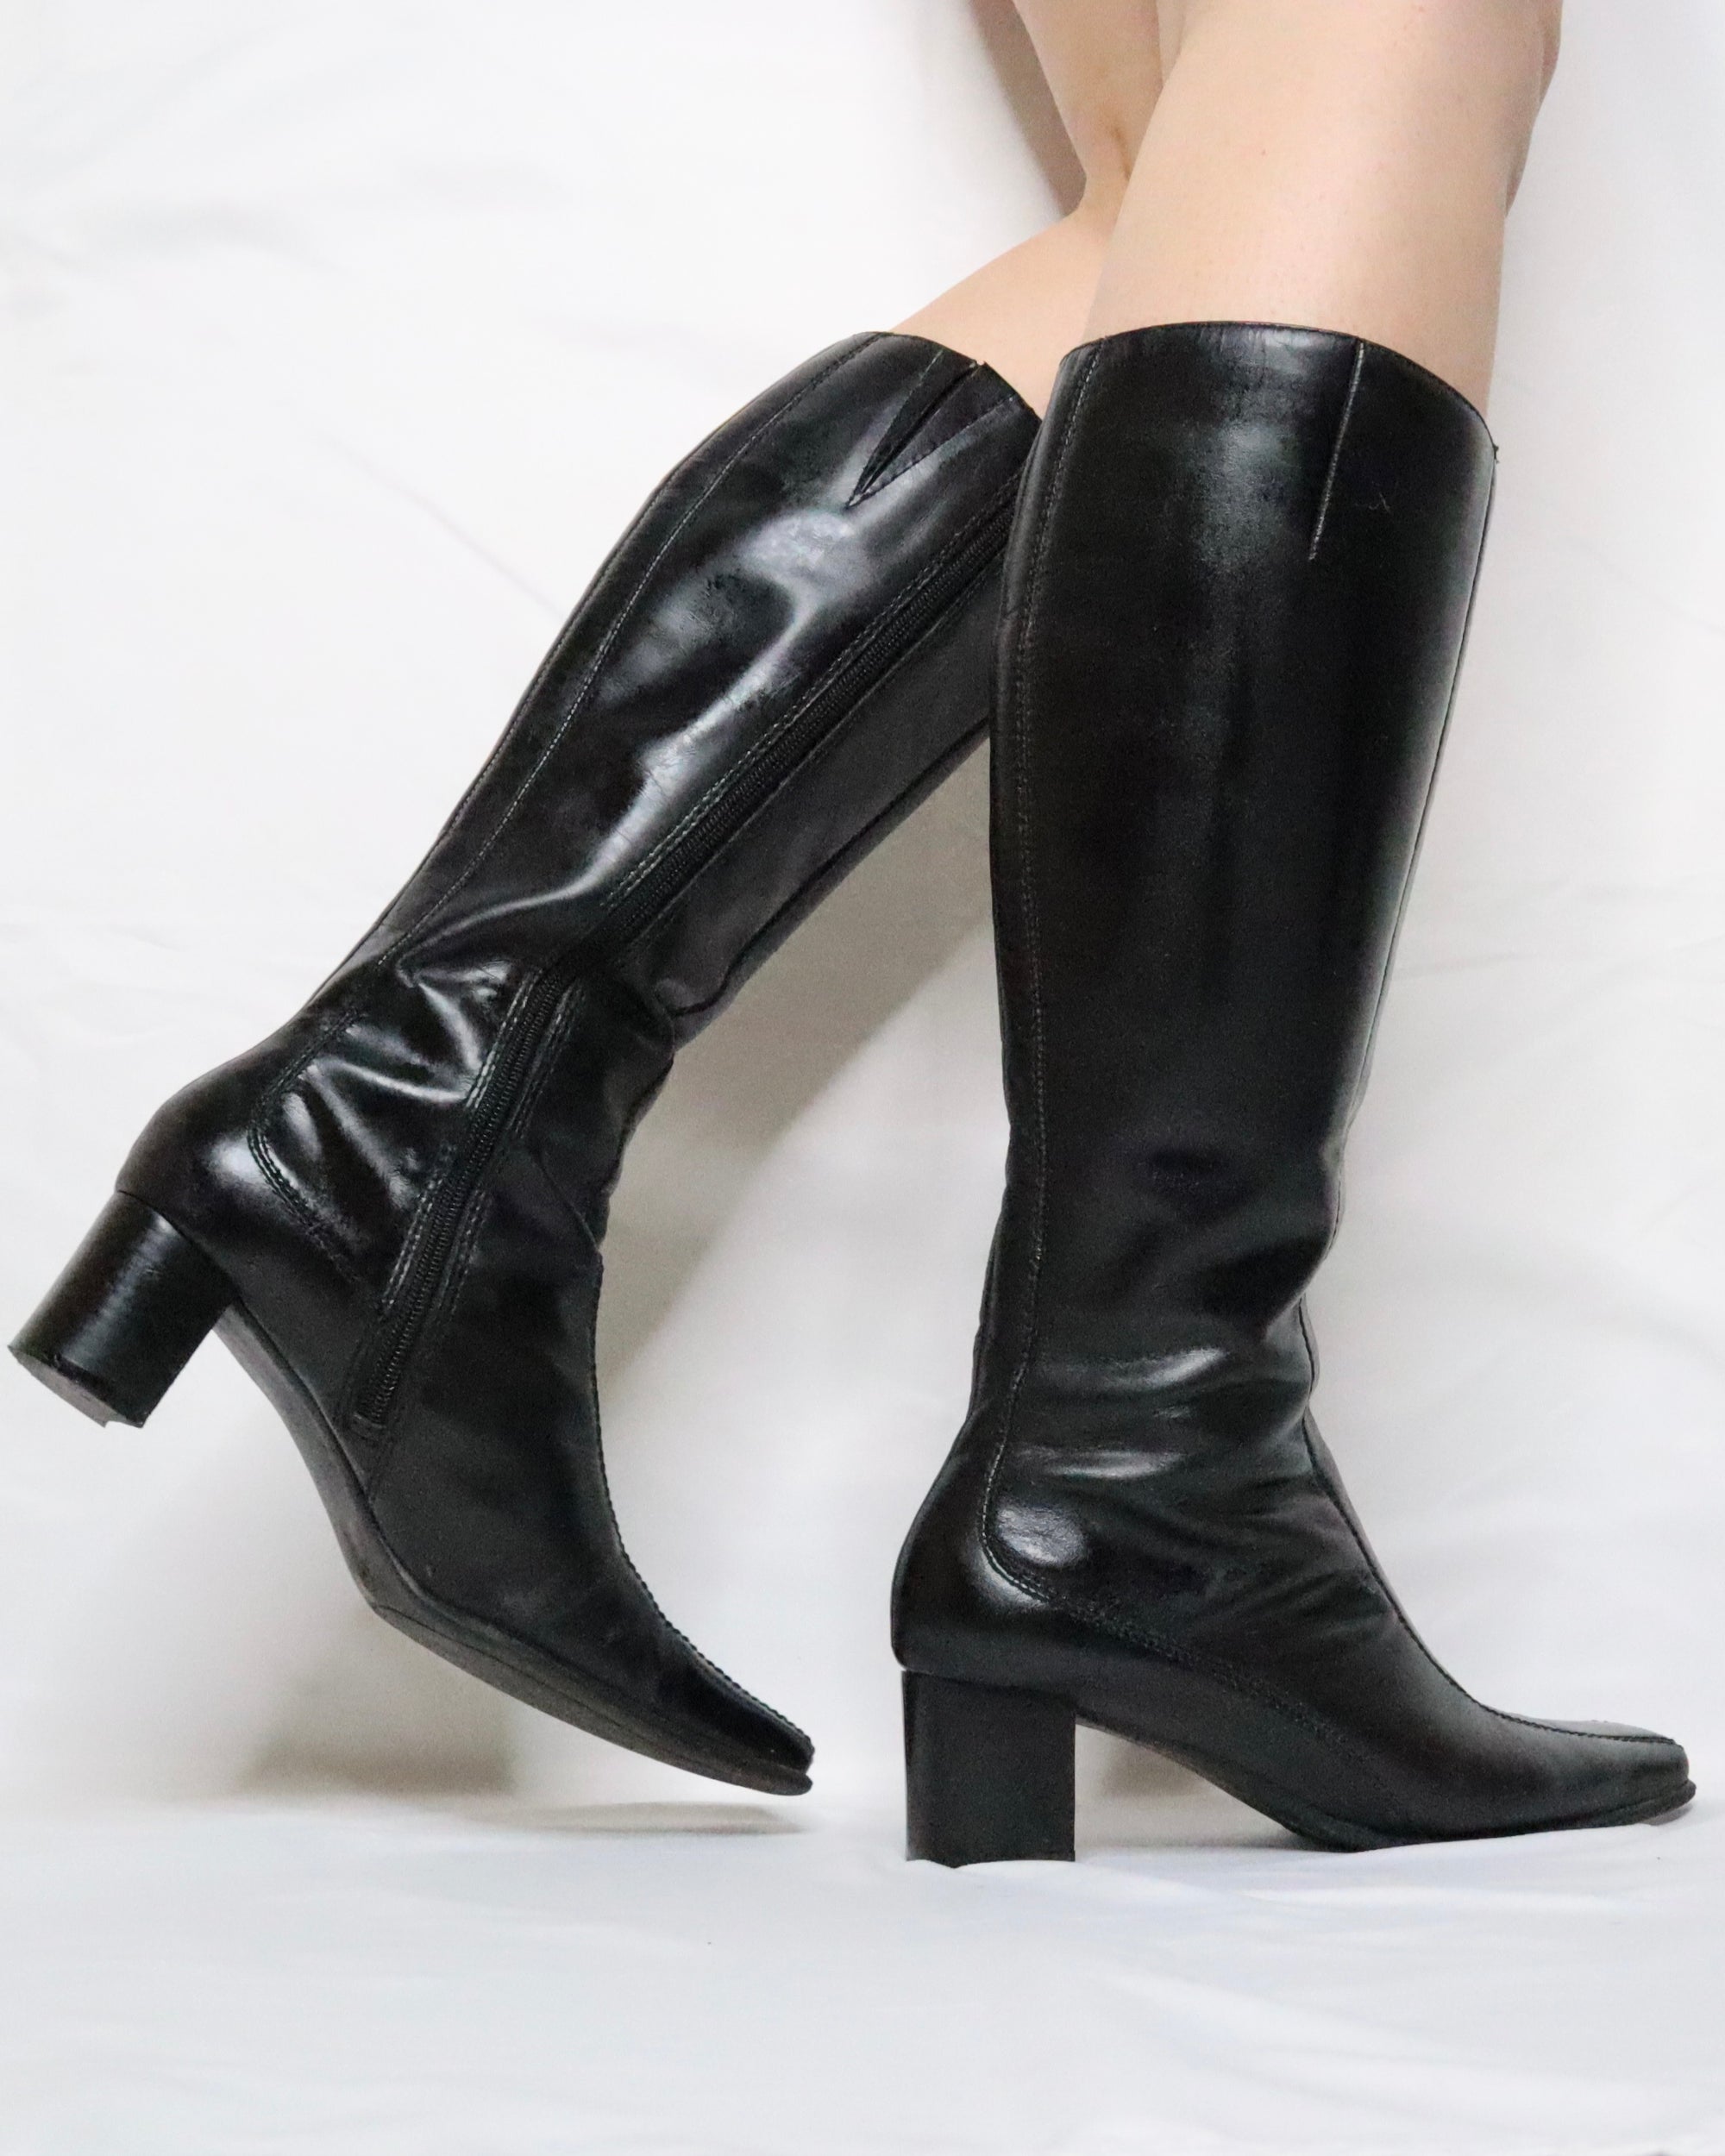 Black Knee High Leather Boots (8 US) 